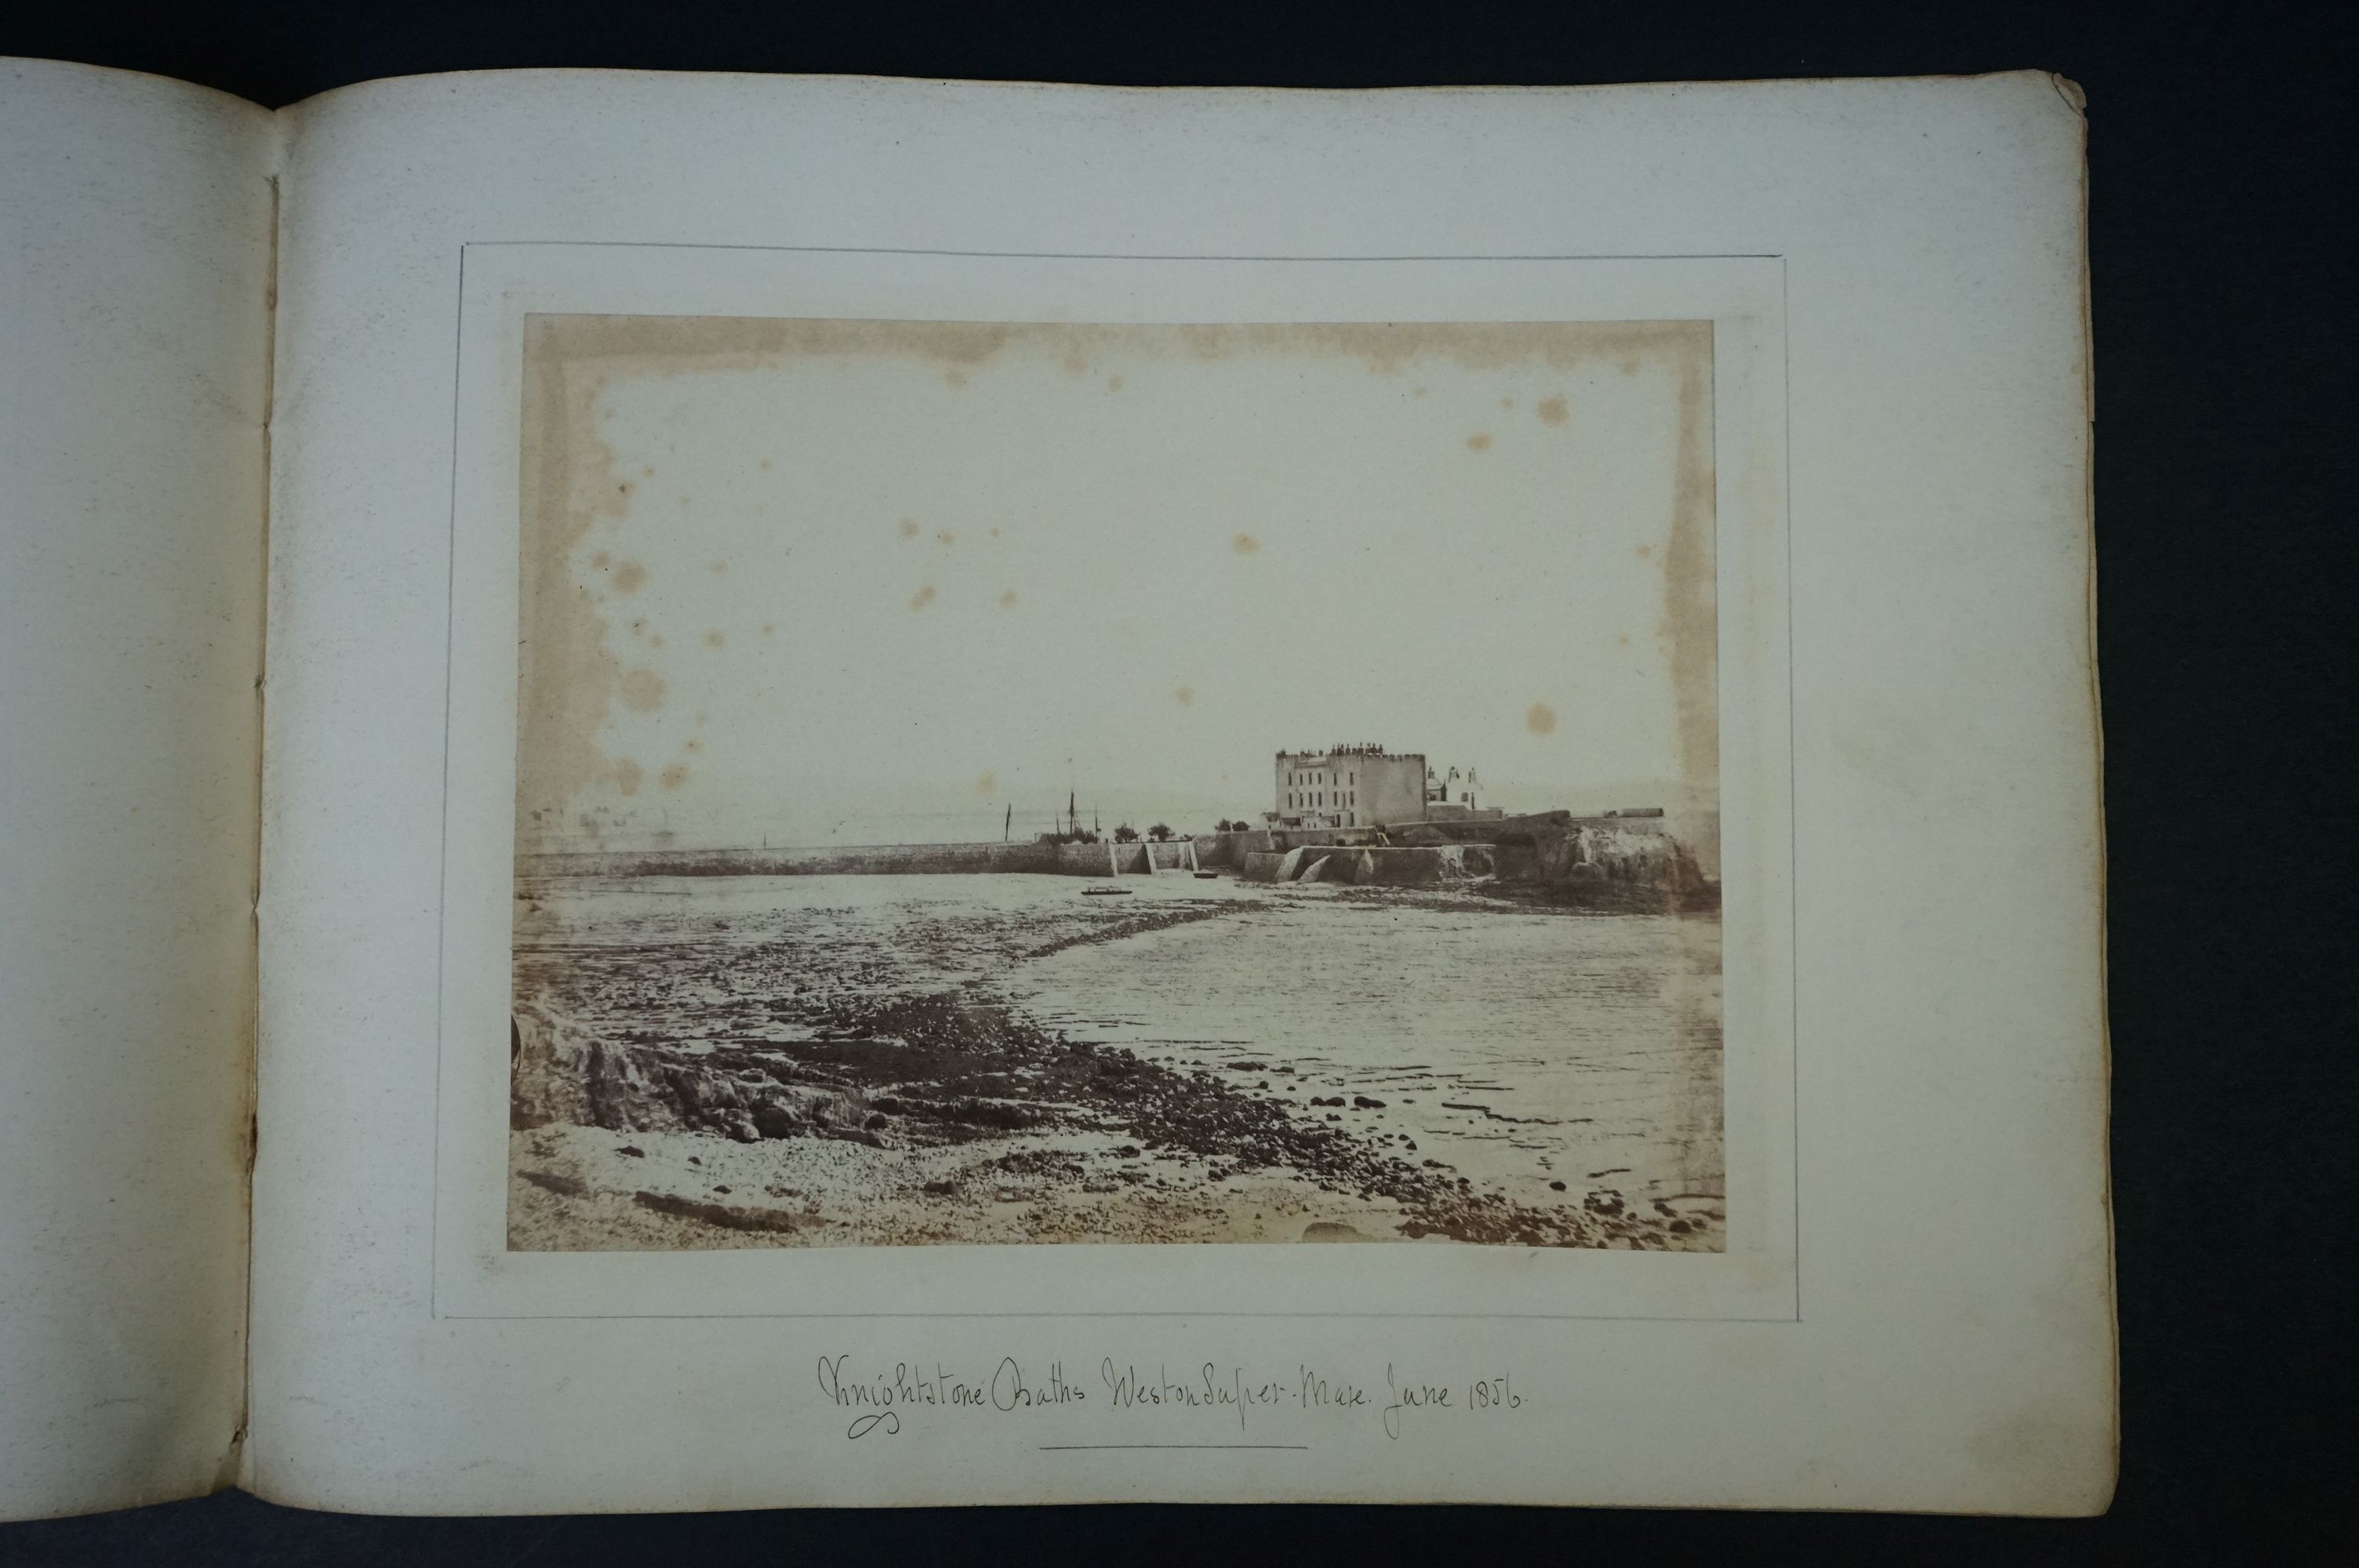 Photographic Illustrations by J.W.G. Gutch, M.R.C.S.L. Division No. 13. Deanery of Winchcombe. - Image 14 of 26